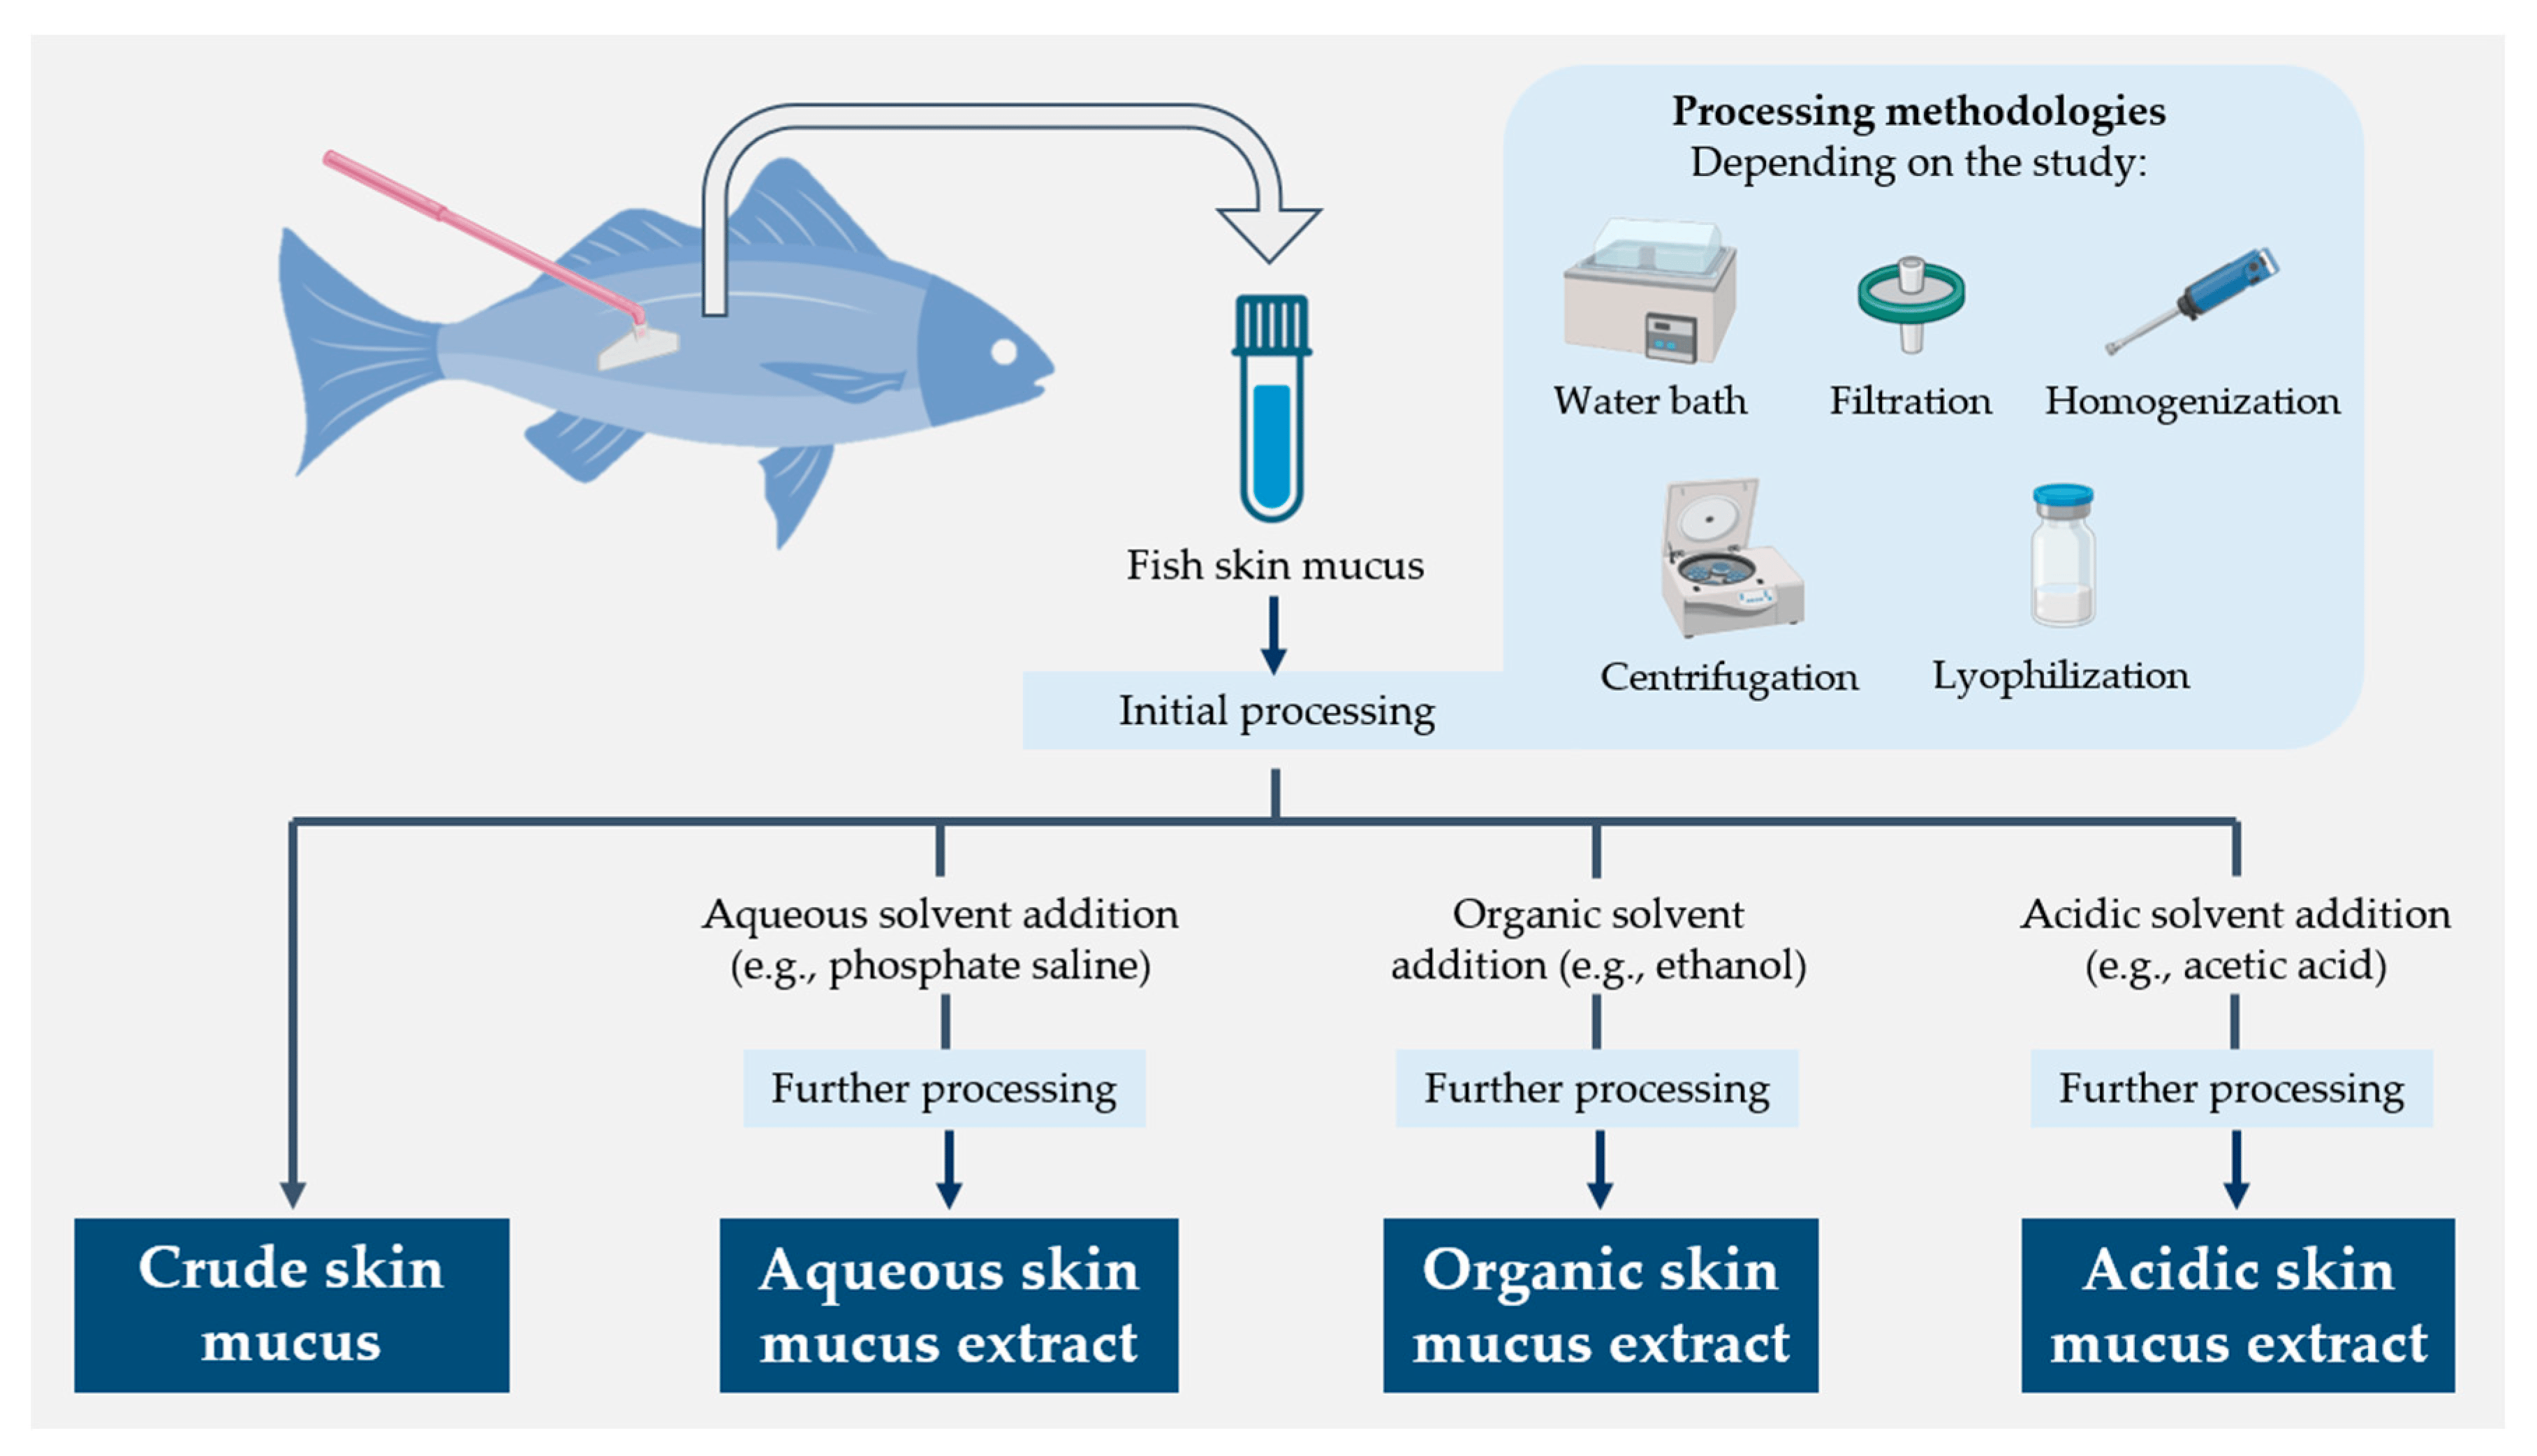 Schematic diagram summarizing the different molecular extraction approaches used for fish skin mucus samples